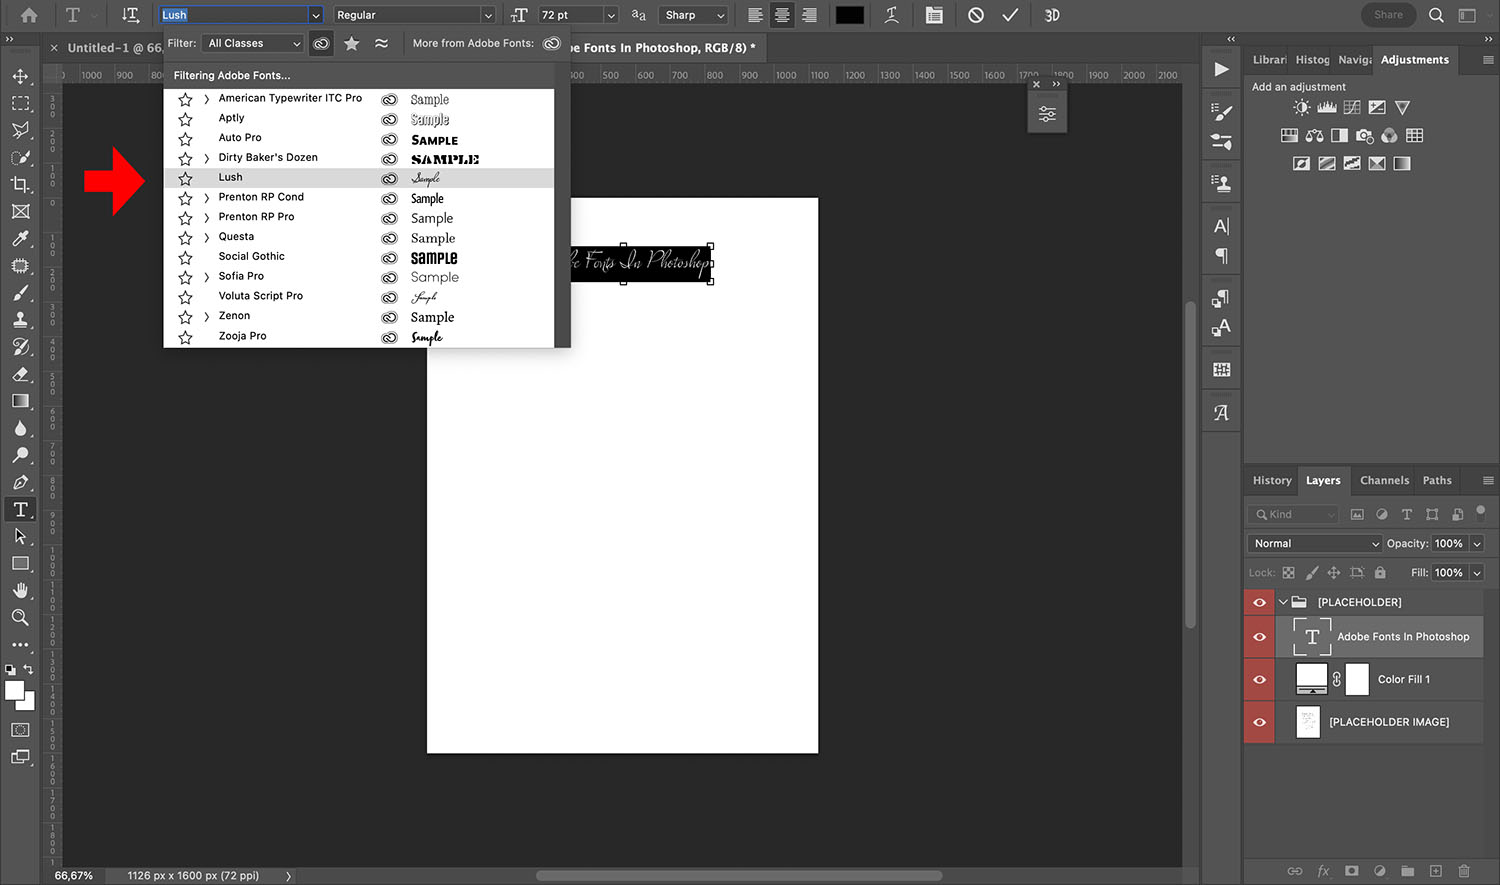 A guide to Adobe Fonts in Photoshop